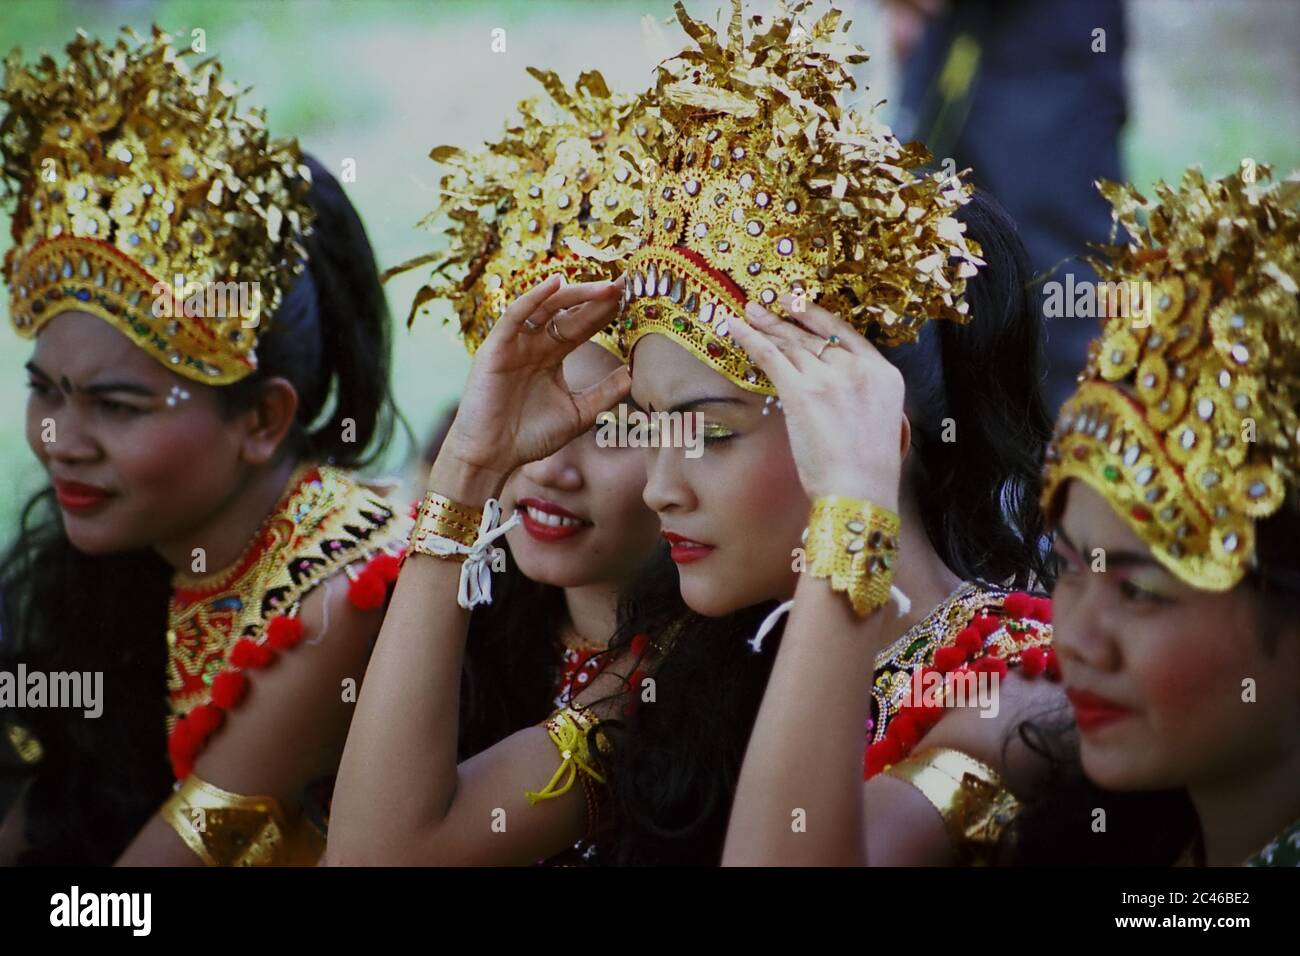 Indonesian traditional dancers grouping as they wait for stage performance during the 2004 Jakarta Highland Gathering in Karawaci, Banten, Indonesia. Archival photo. Stock Photo